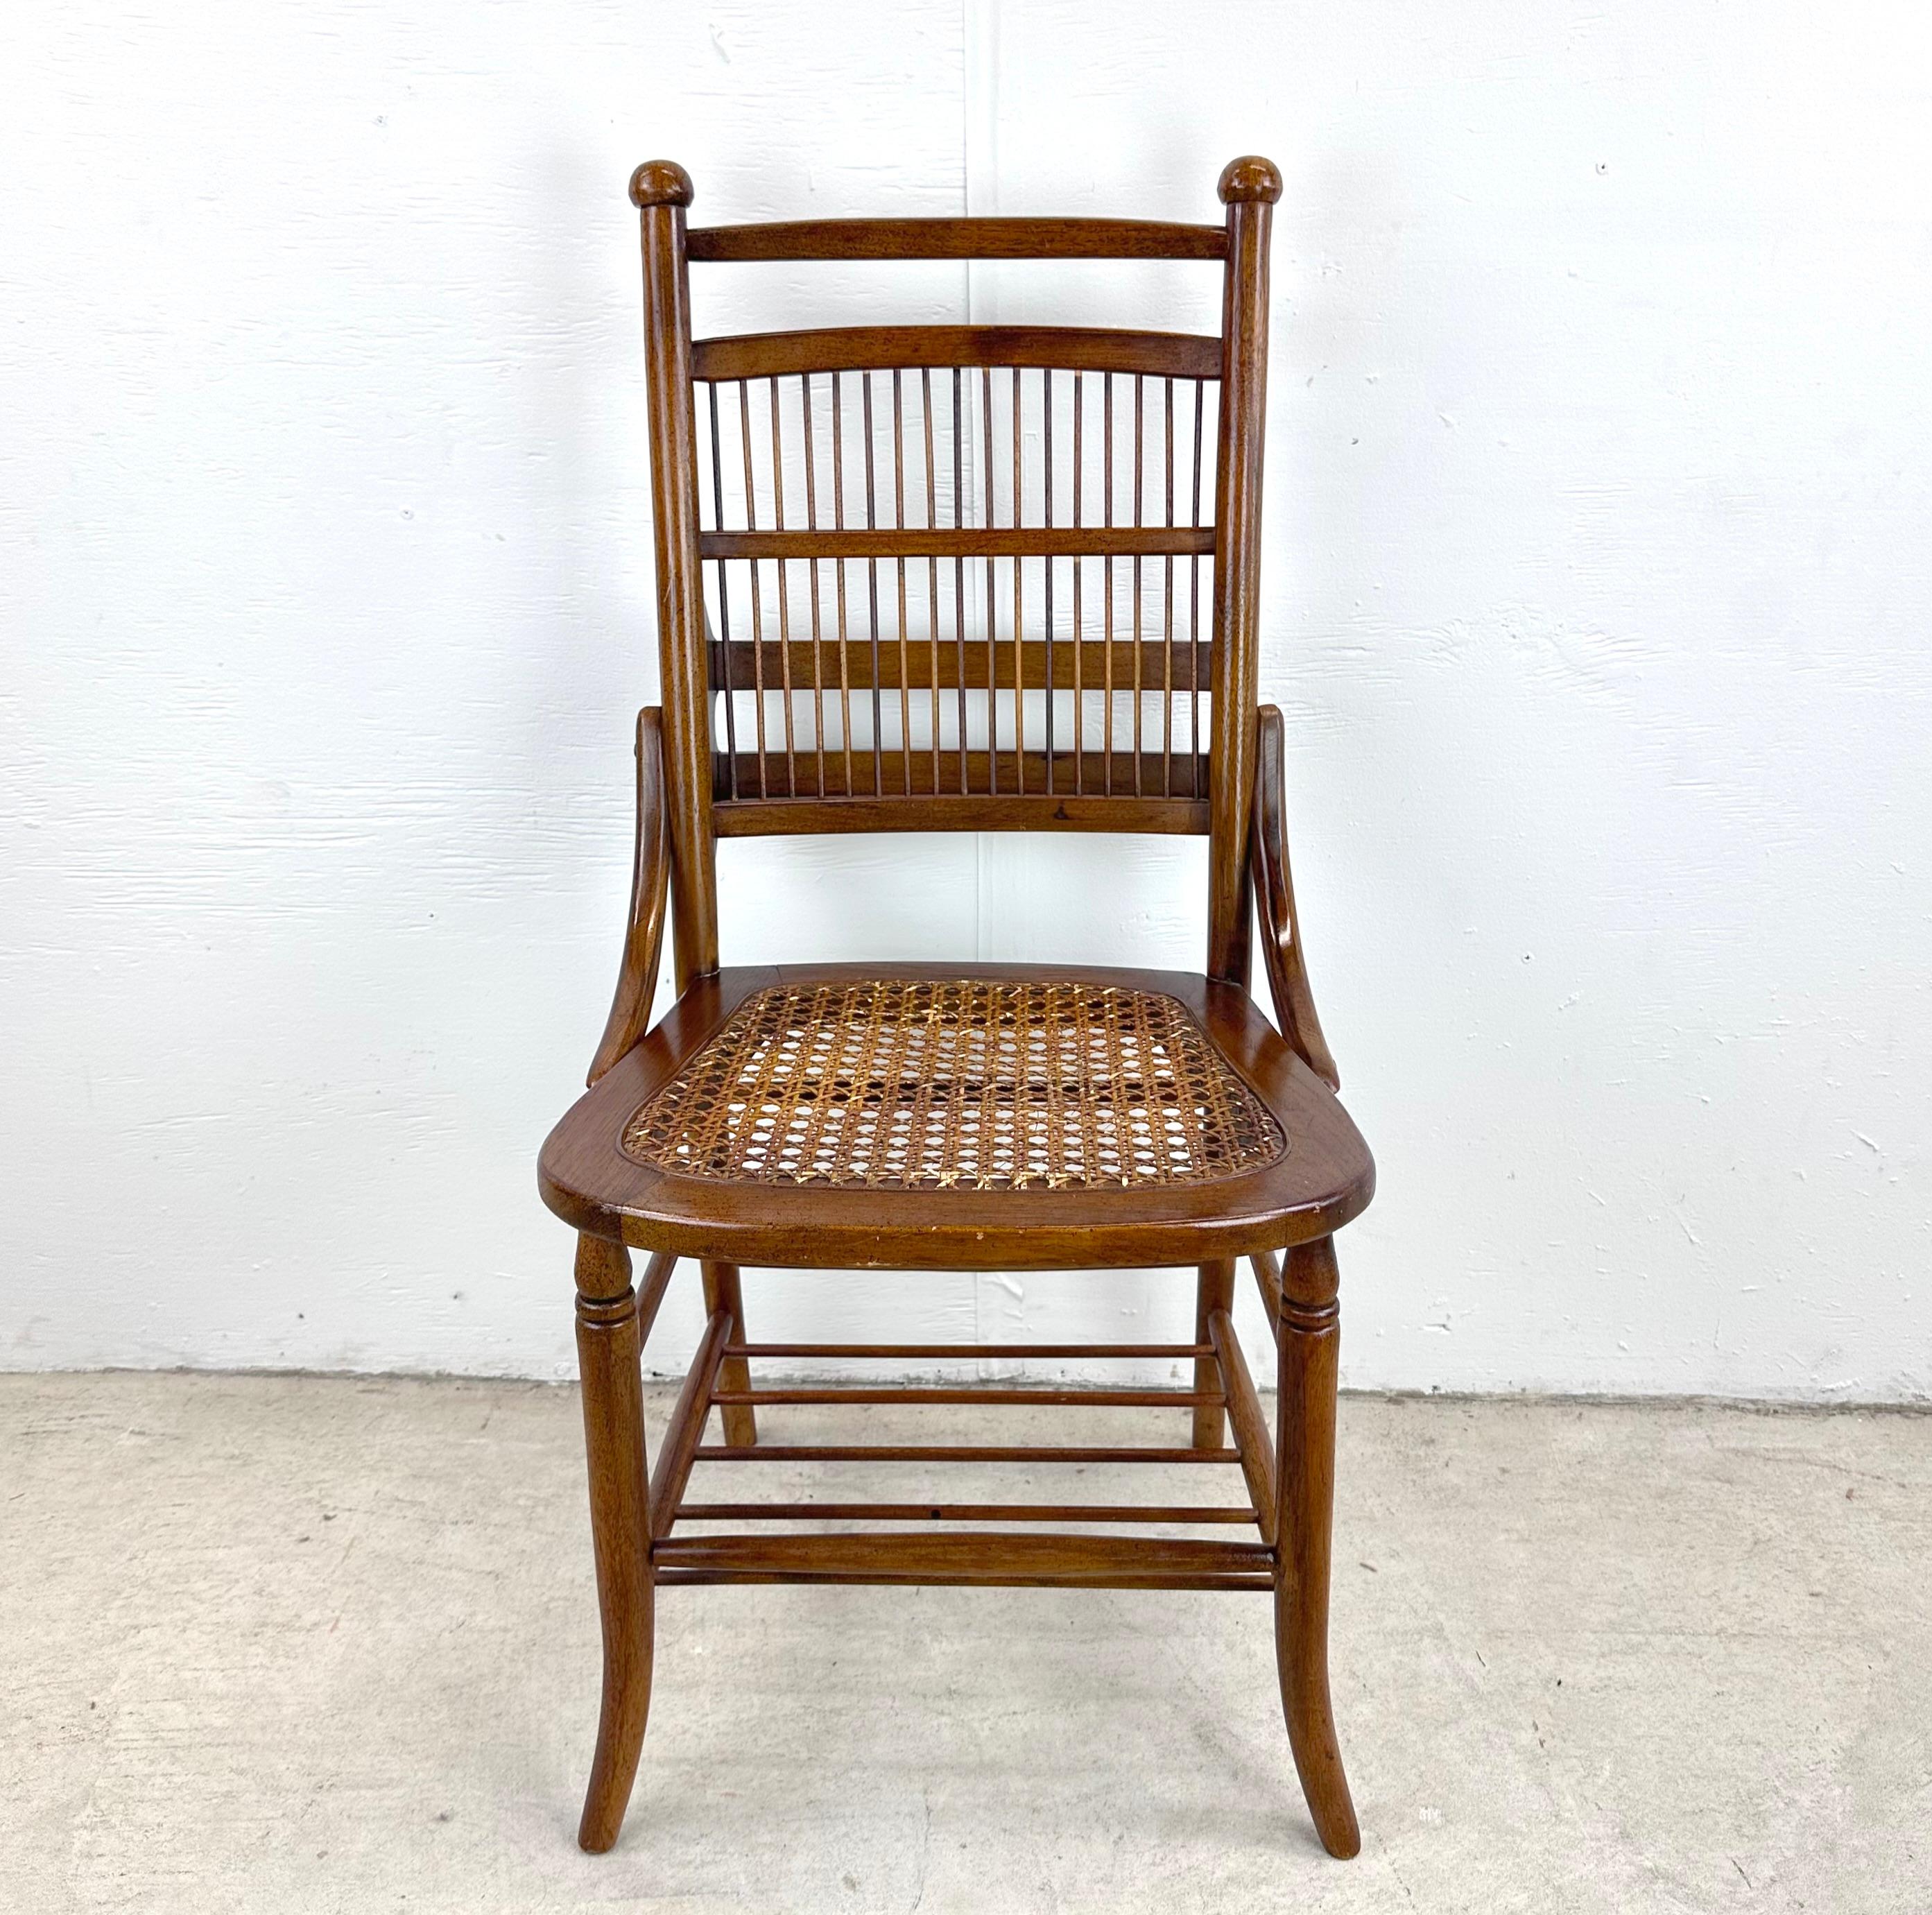 Are you in search of a unique piece of furniture that effortlessly combines history, craftsmanship, and aesthetic charm? Look no further than this Vintage Spindle Back Cane Seat Chair. This beautifully carved chair is a true testament to timeless